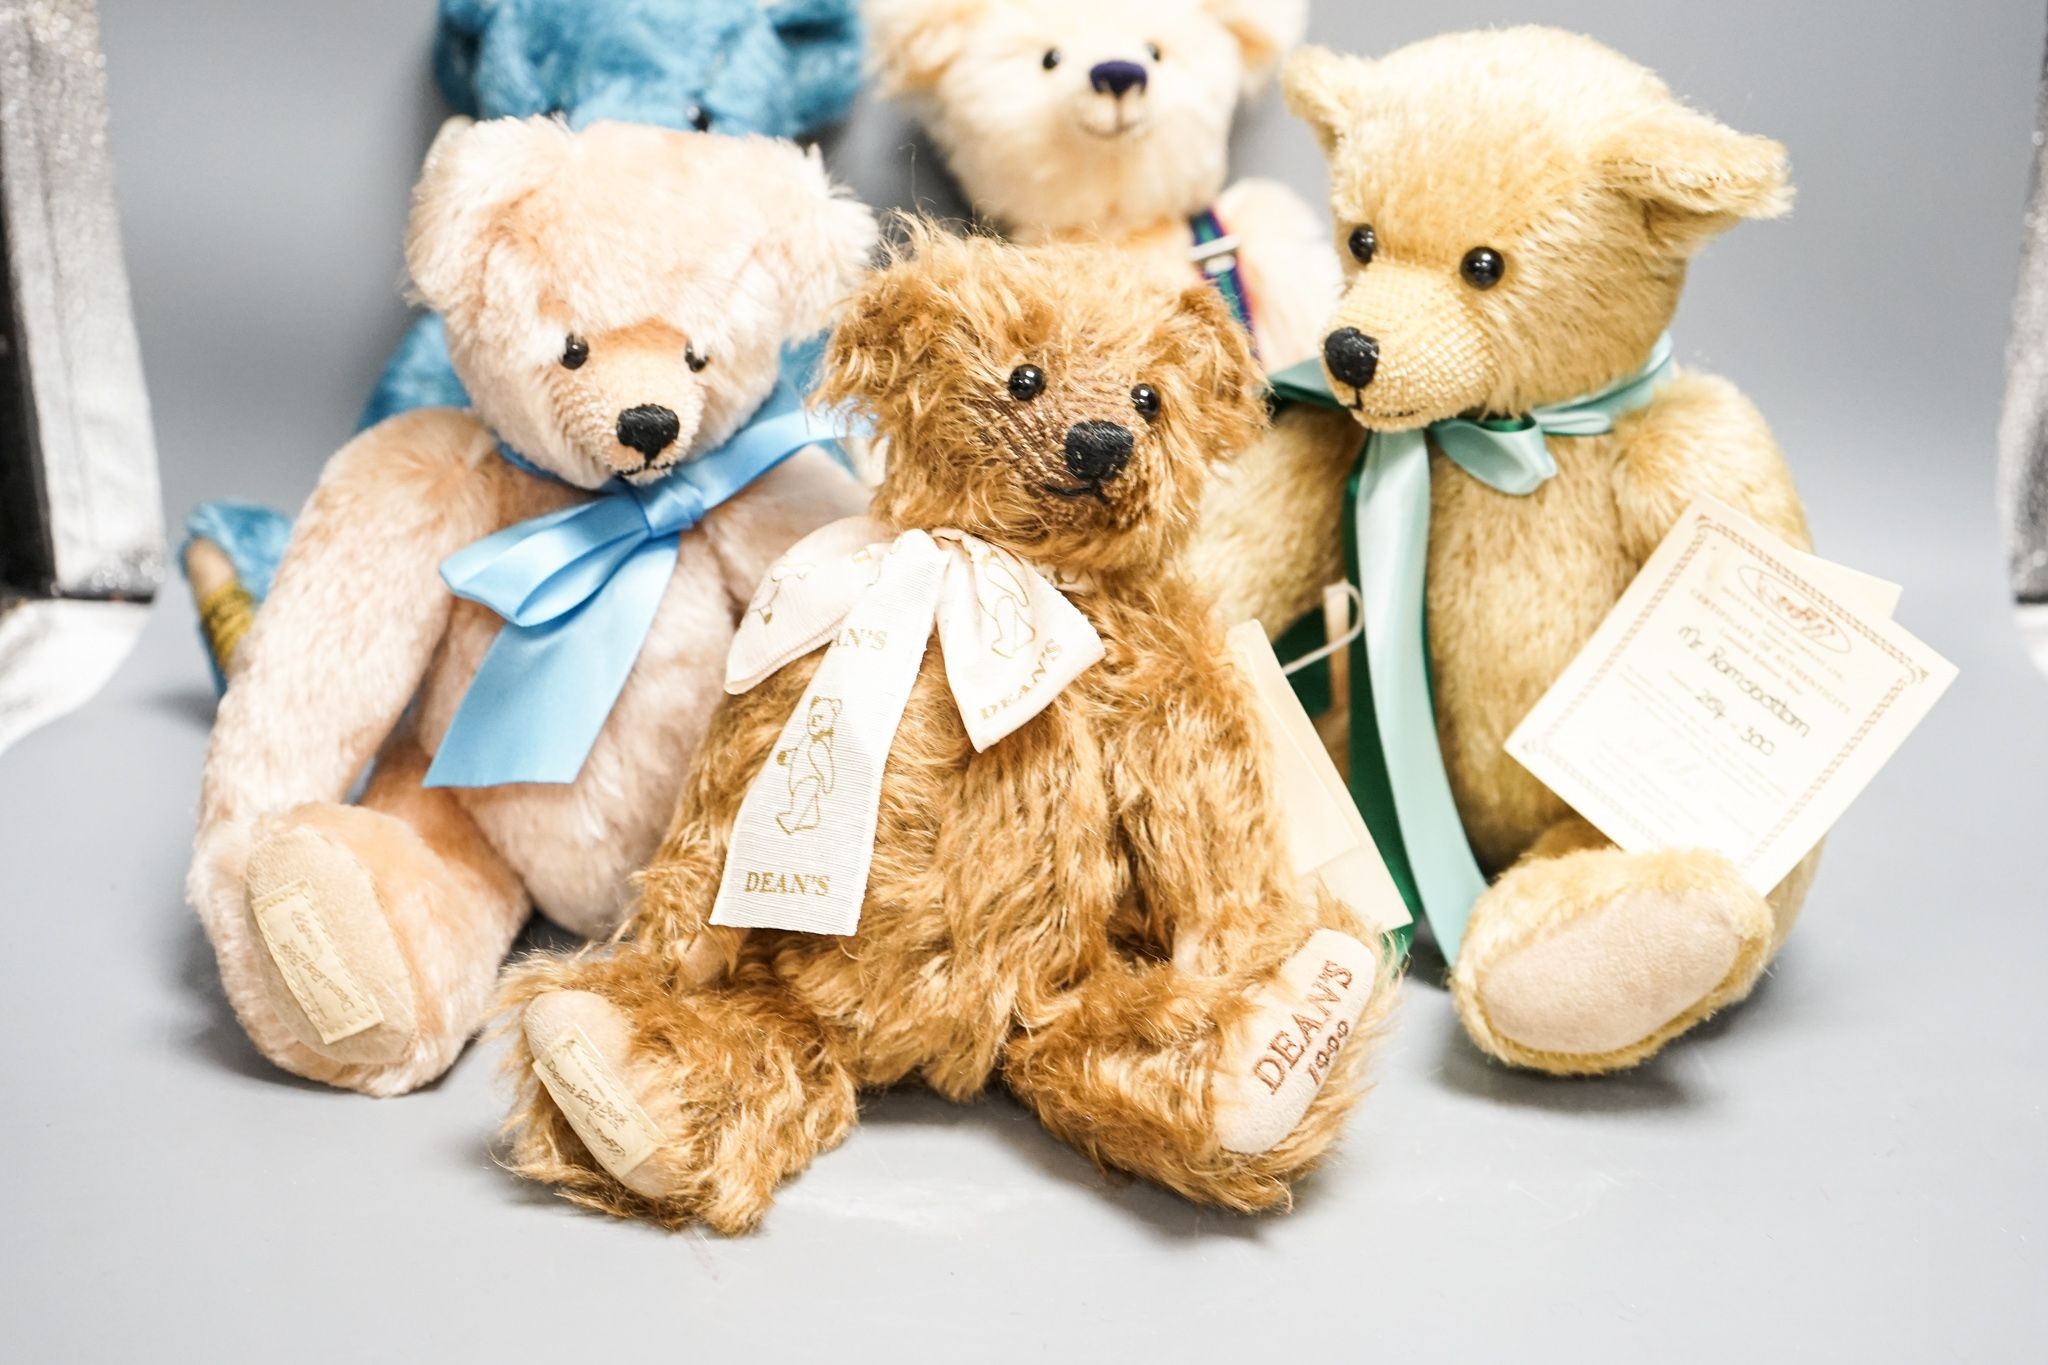 Four Deans Bears with certificates and one Merrythought